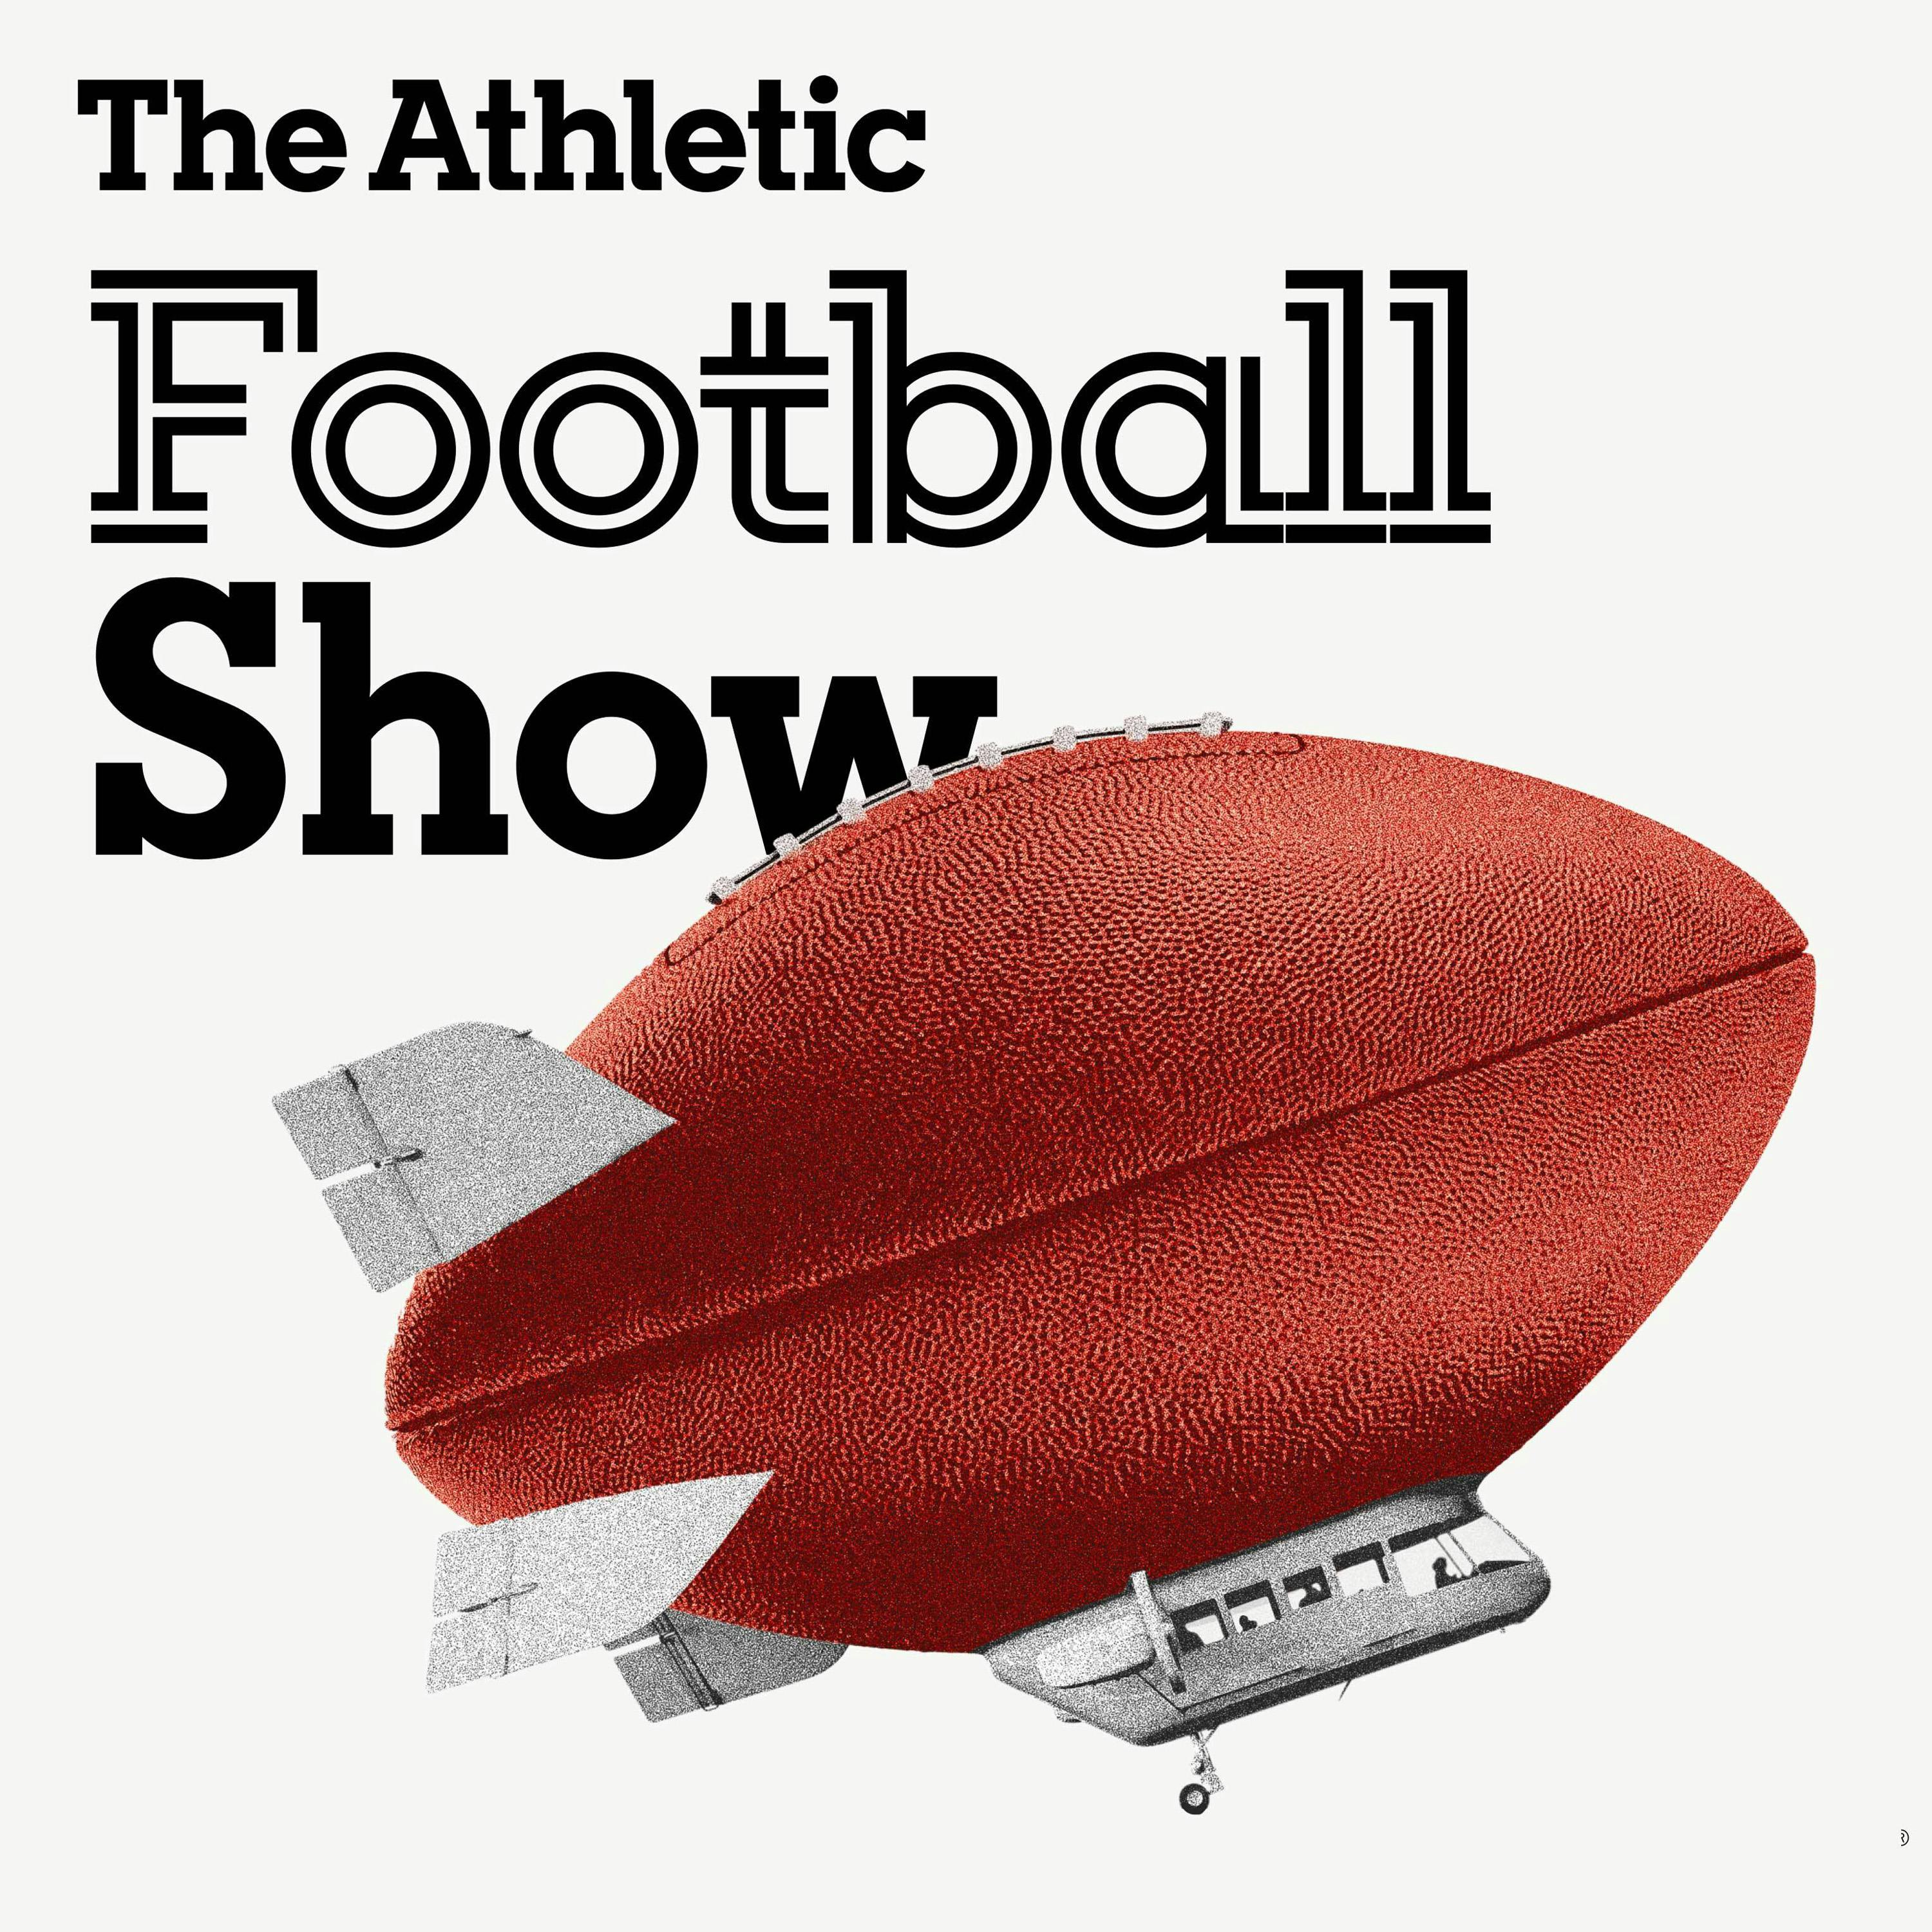 The Athletic Football Show podcast